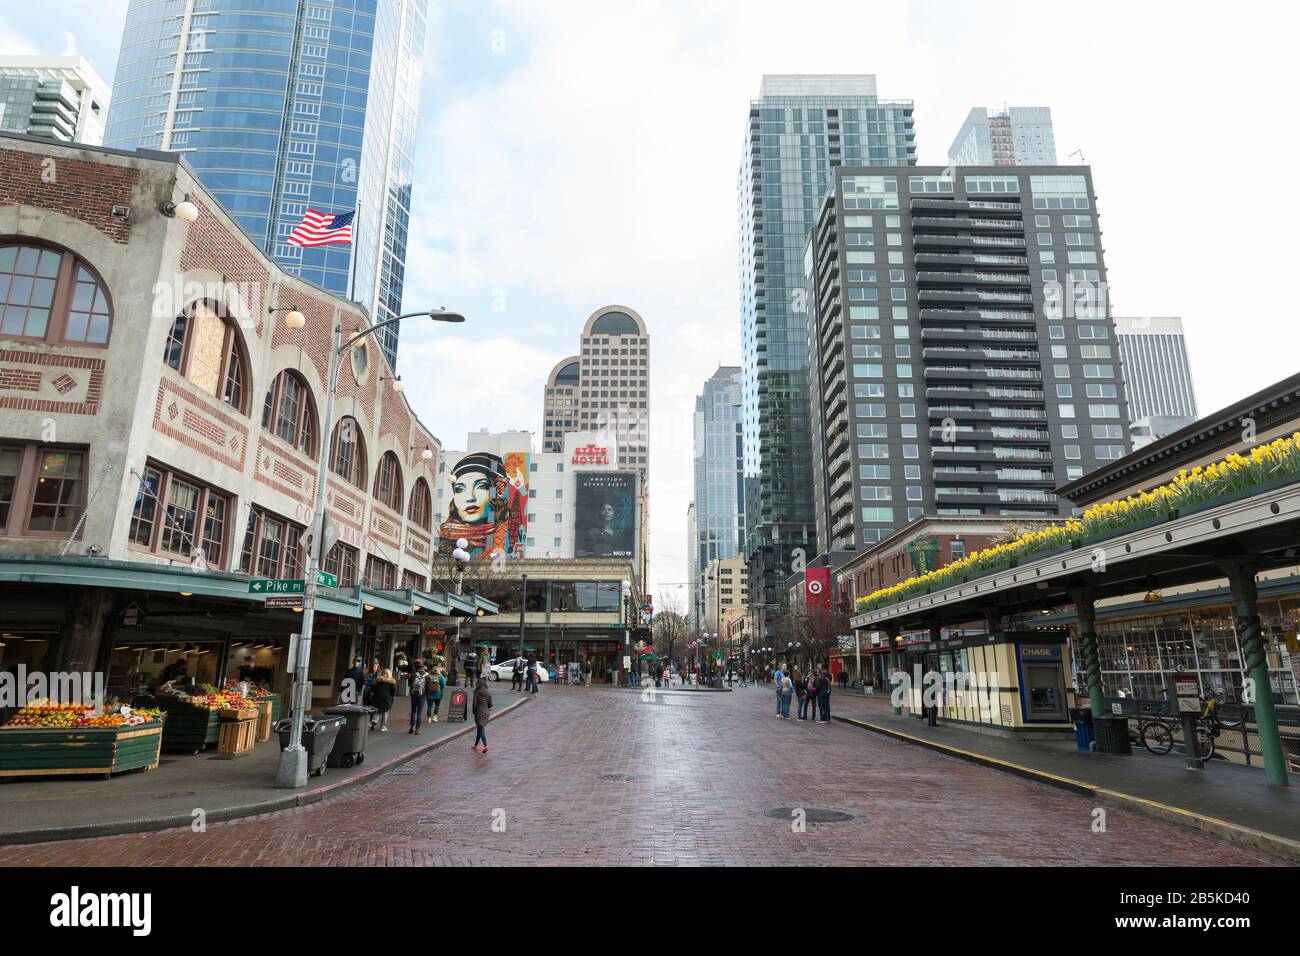 Pike Street remains quiet on Sunday, March 8. 2020. As the epicenter of the coronavirus outbreak in the U.S., Seattle area business struggle while work and travel restrictions continue to impact the local economy. Stock Photo